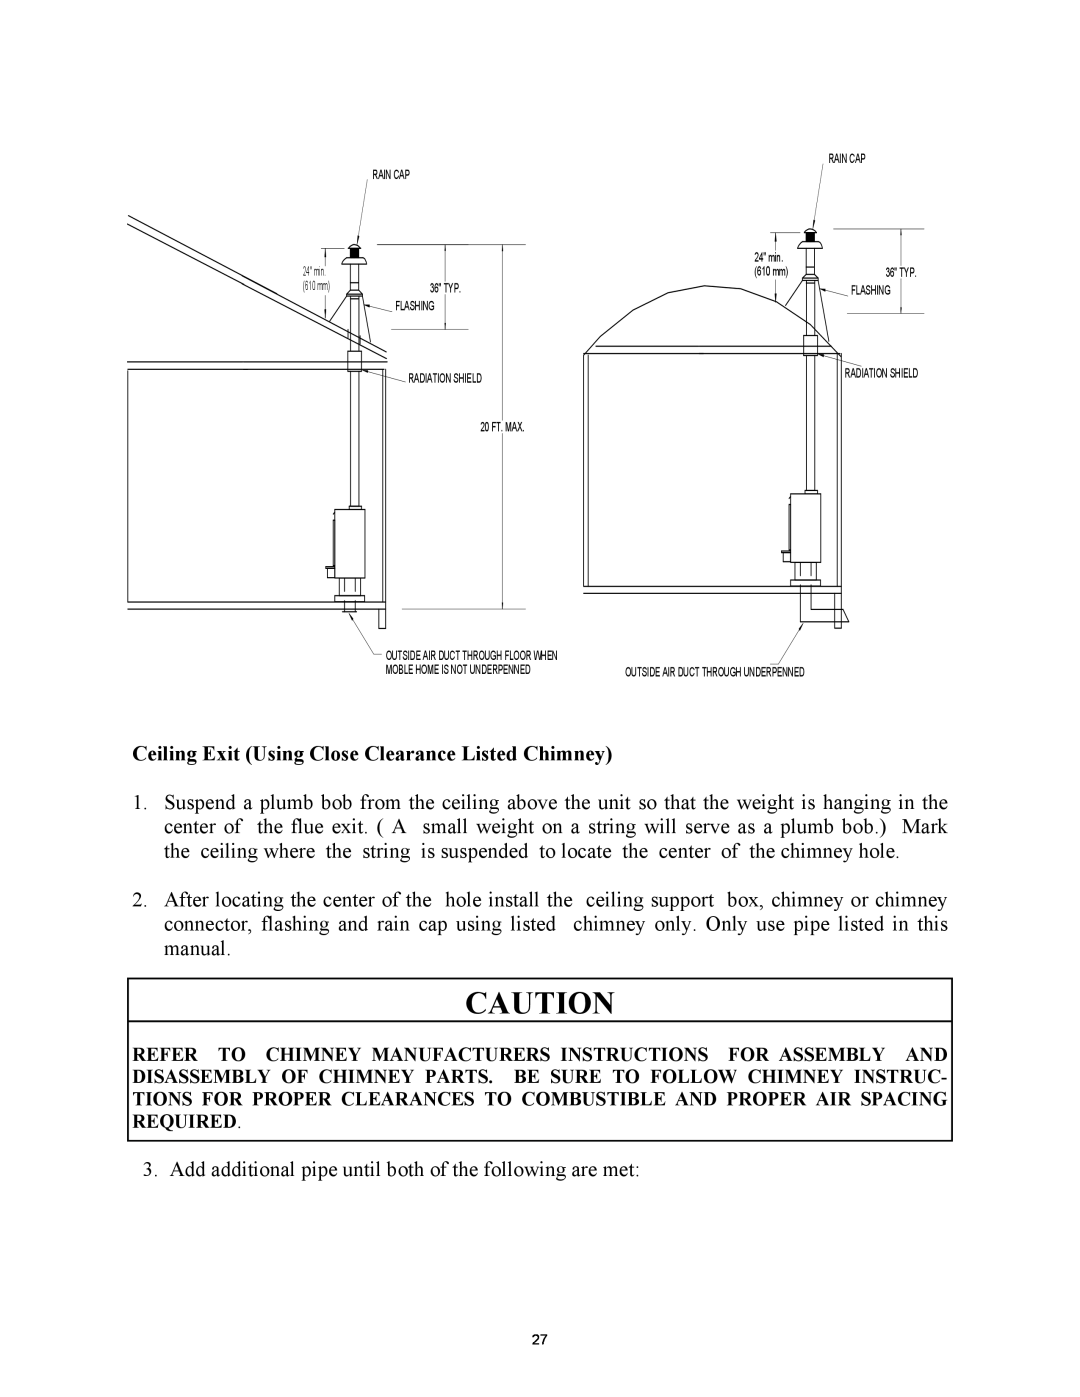 New Buck Corporation 81 installation instructions Ceiling Exit Using Close Clearance Listed Chimney 